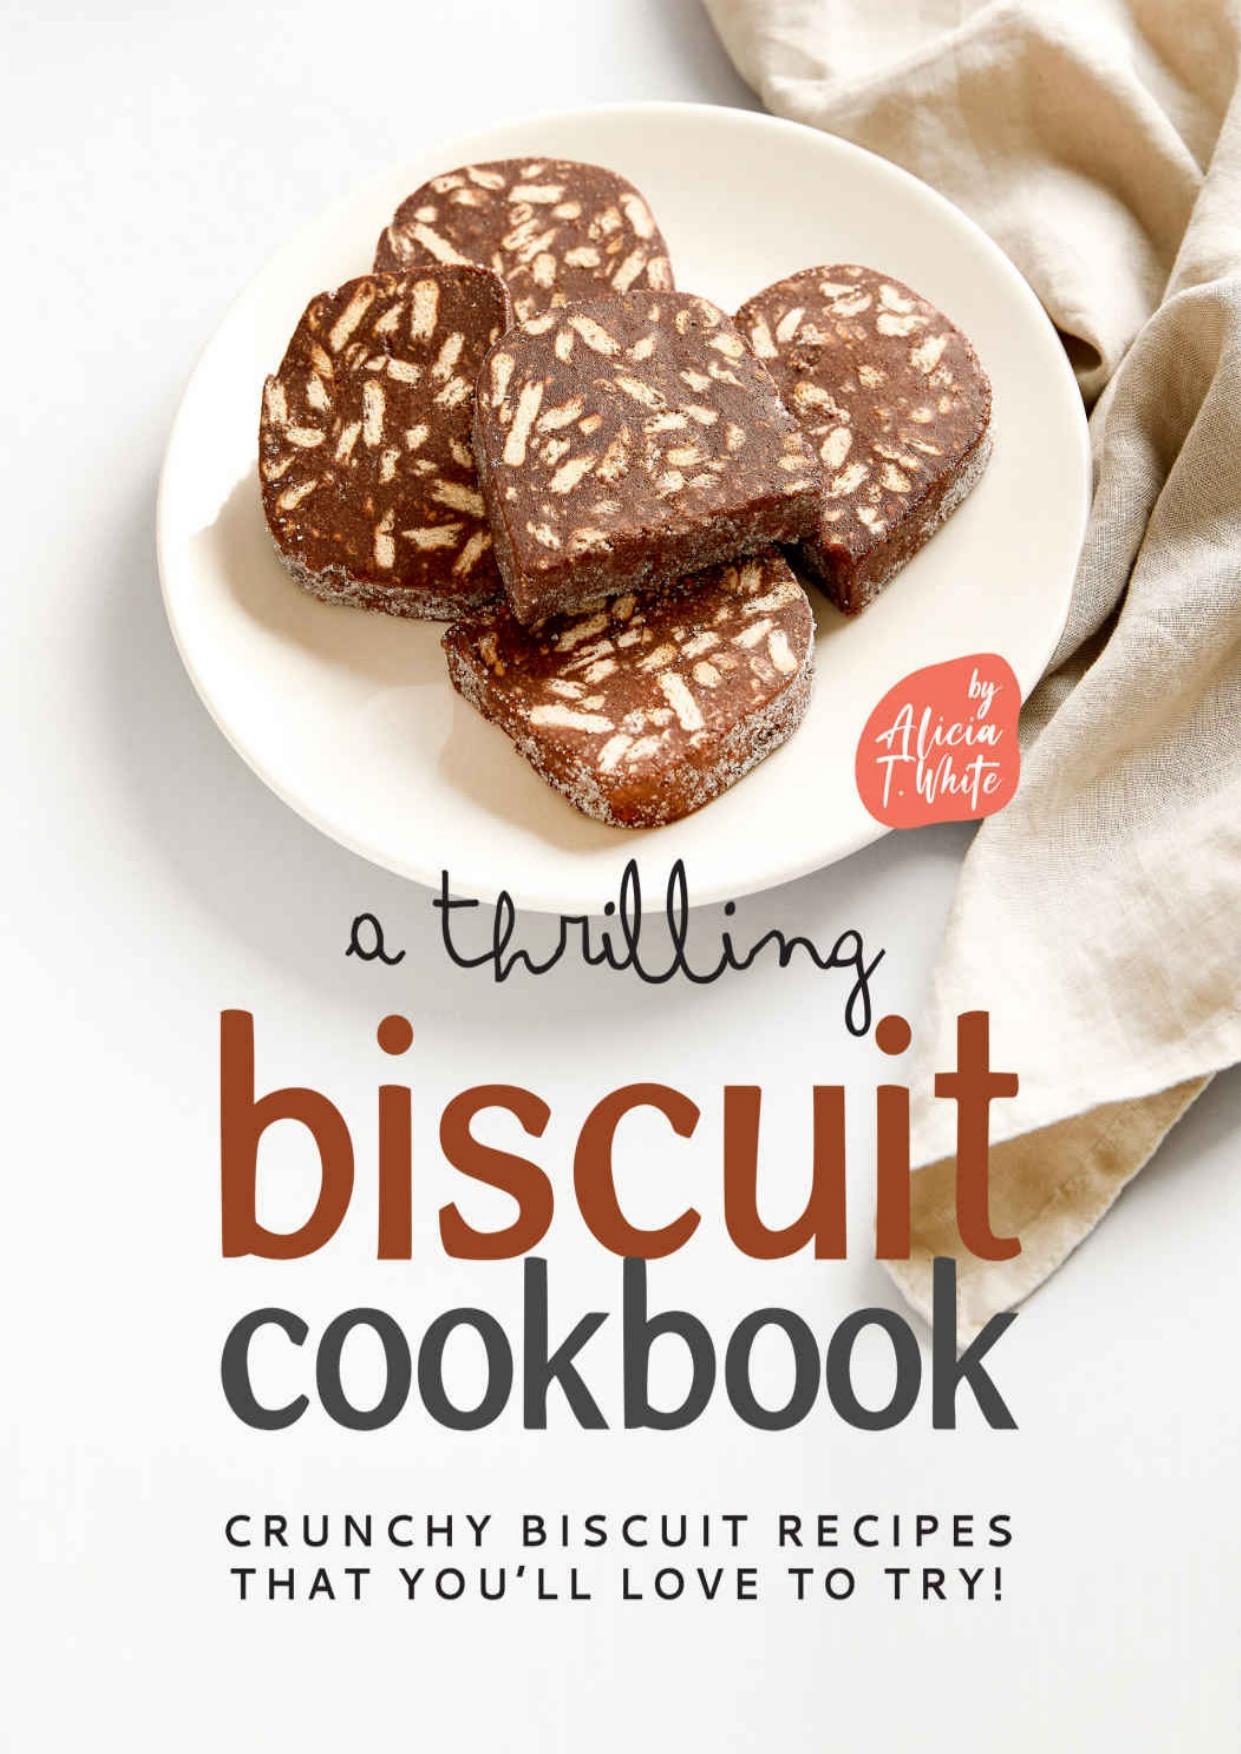 A Thrilling Biscuit Cookbook: Crunchy Biscuit Recipes That Youâll Love to Try! by Alicia T. White